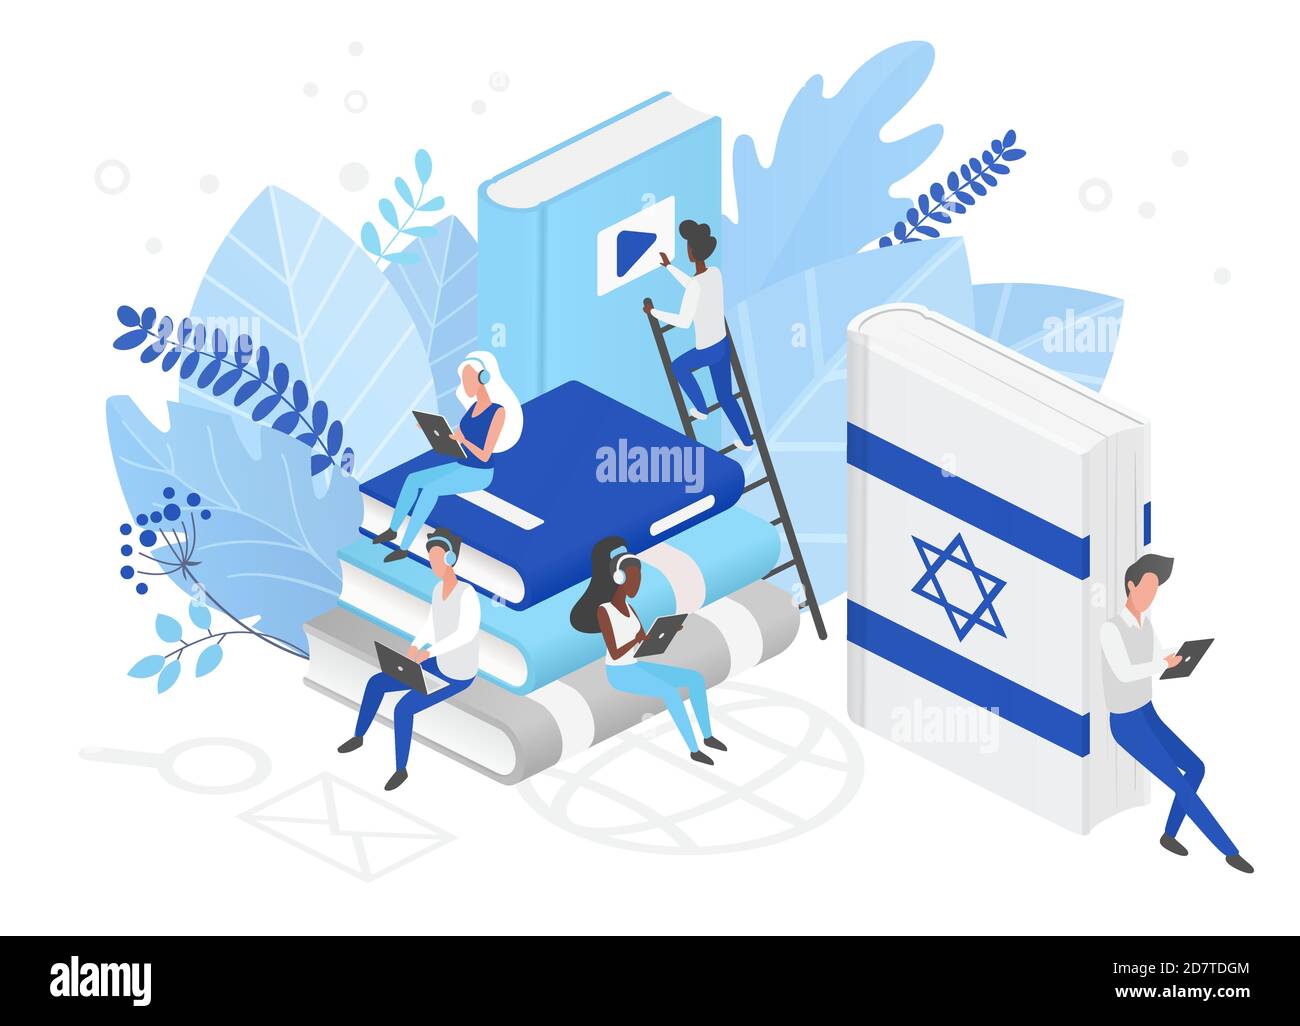 Online Hebrew language courses isometric 3d illustration. Distance education, remote school, Israel university. Language Internet class, students reading books. Teaching foreign languages. Stock Vector